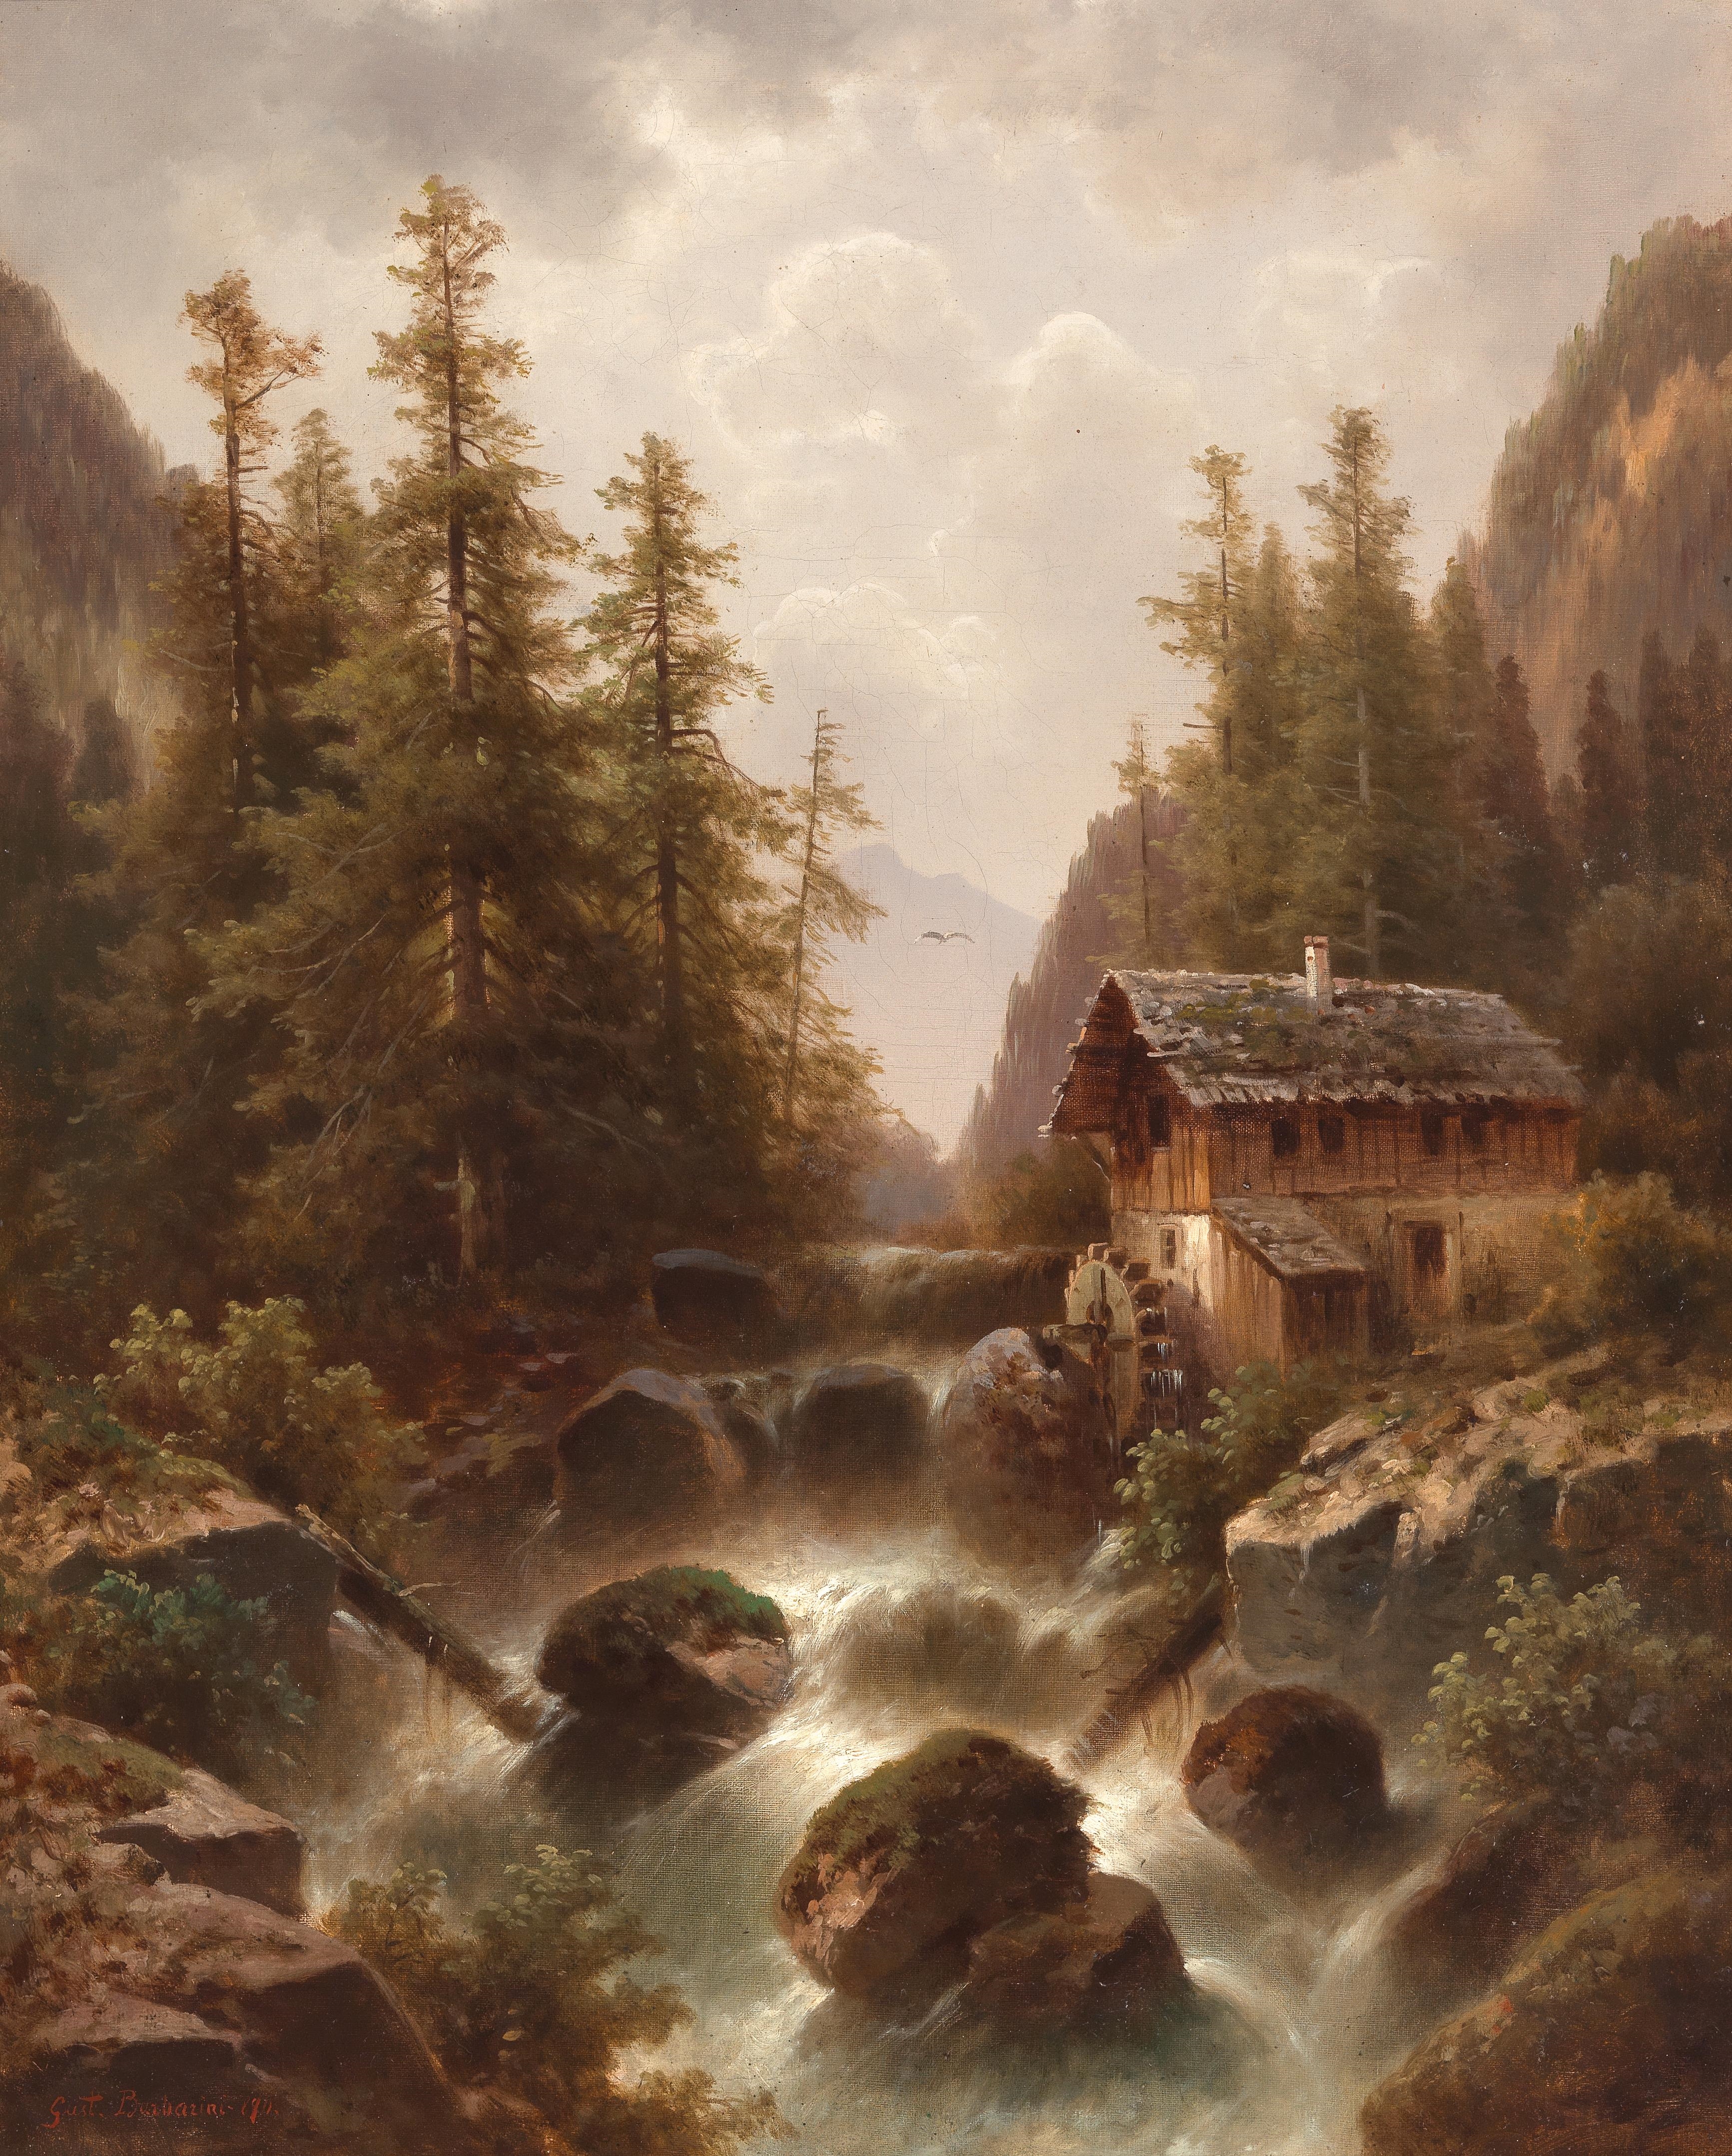 A Mill by a Mountain Torrent by Gustav Barbarini, (1)870